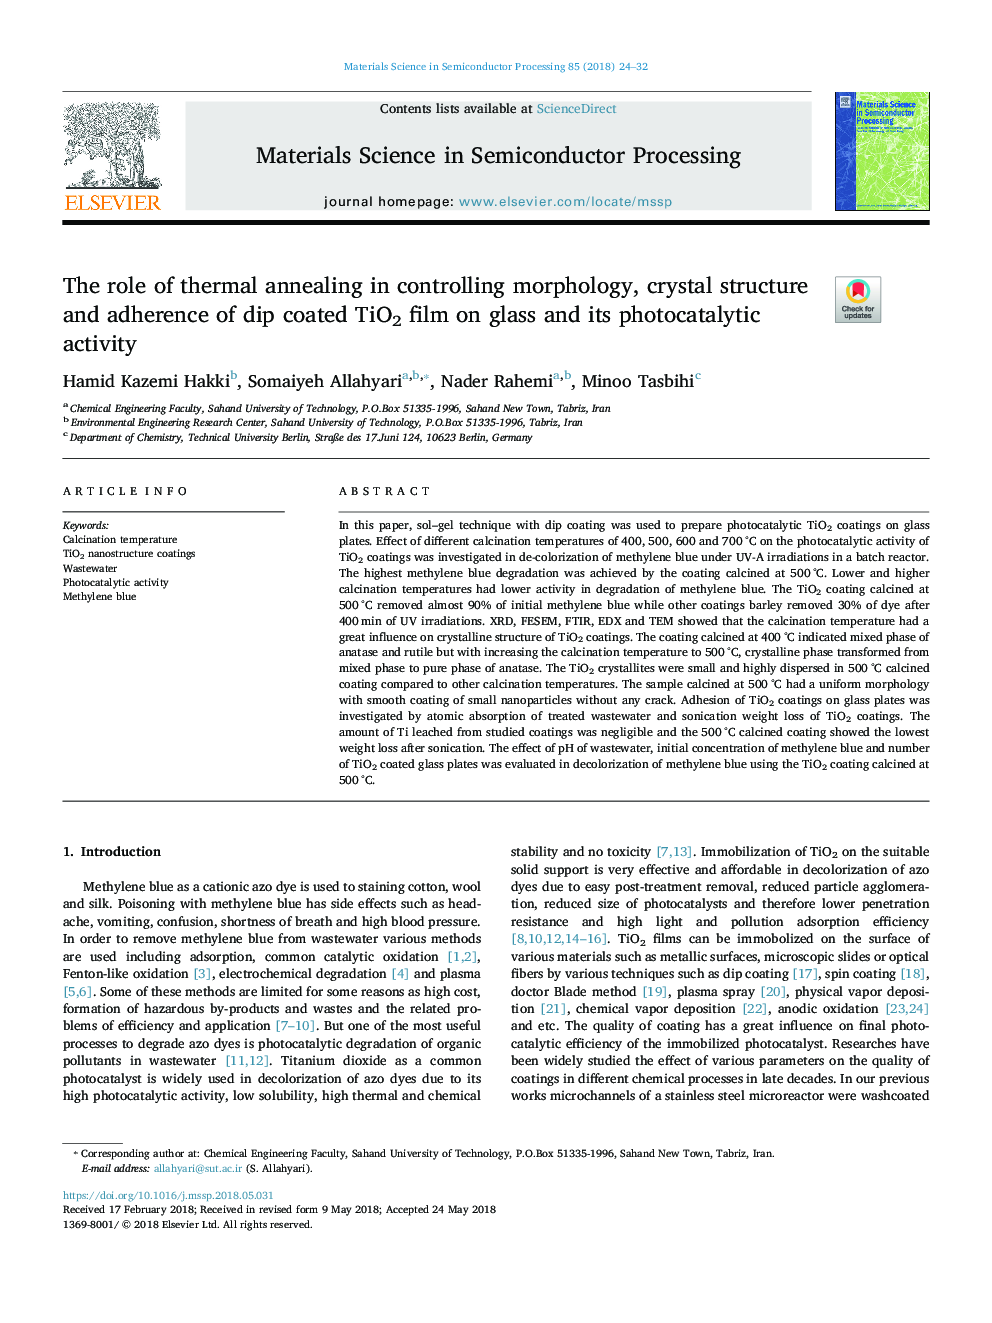 The role of thermal annealing in controlling morphology, crystal structure and adherence of dip coated TiO2 film on glass and its photocatalytic activity